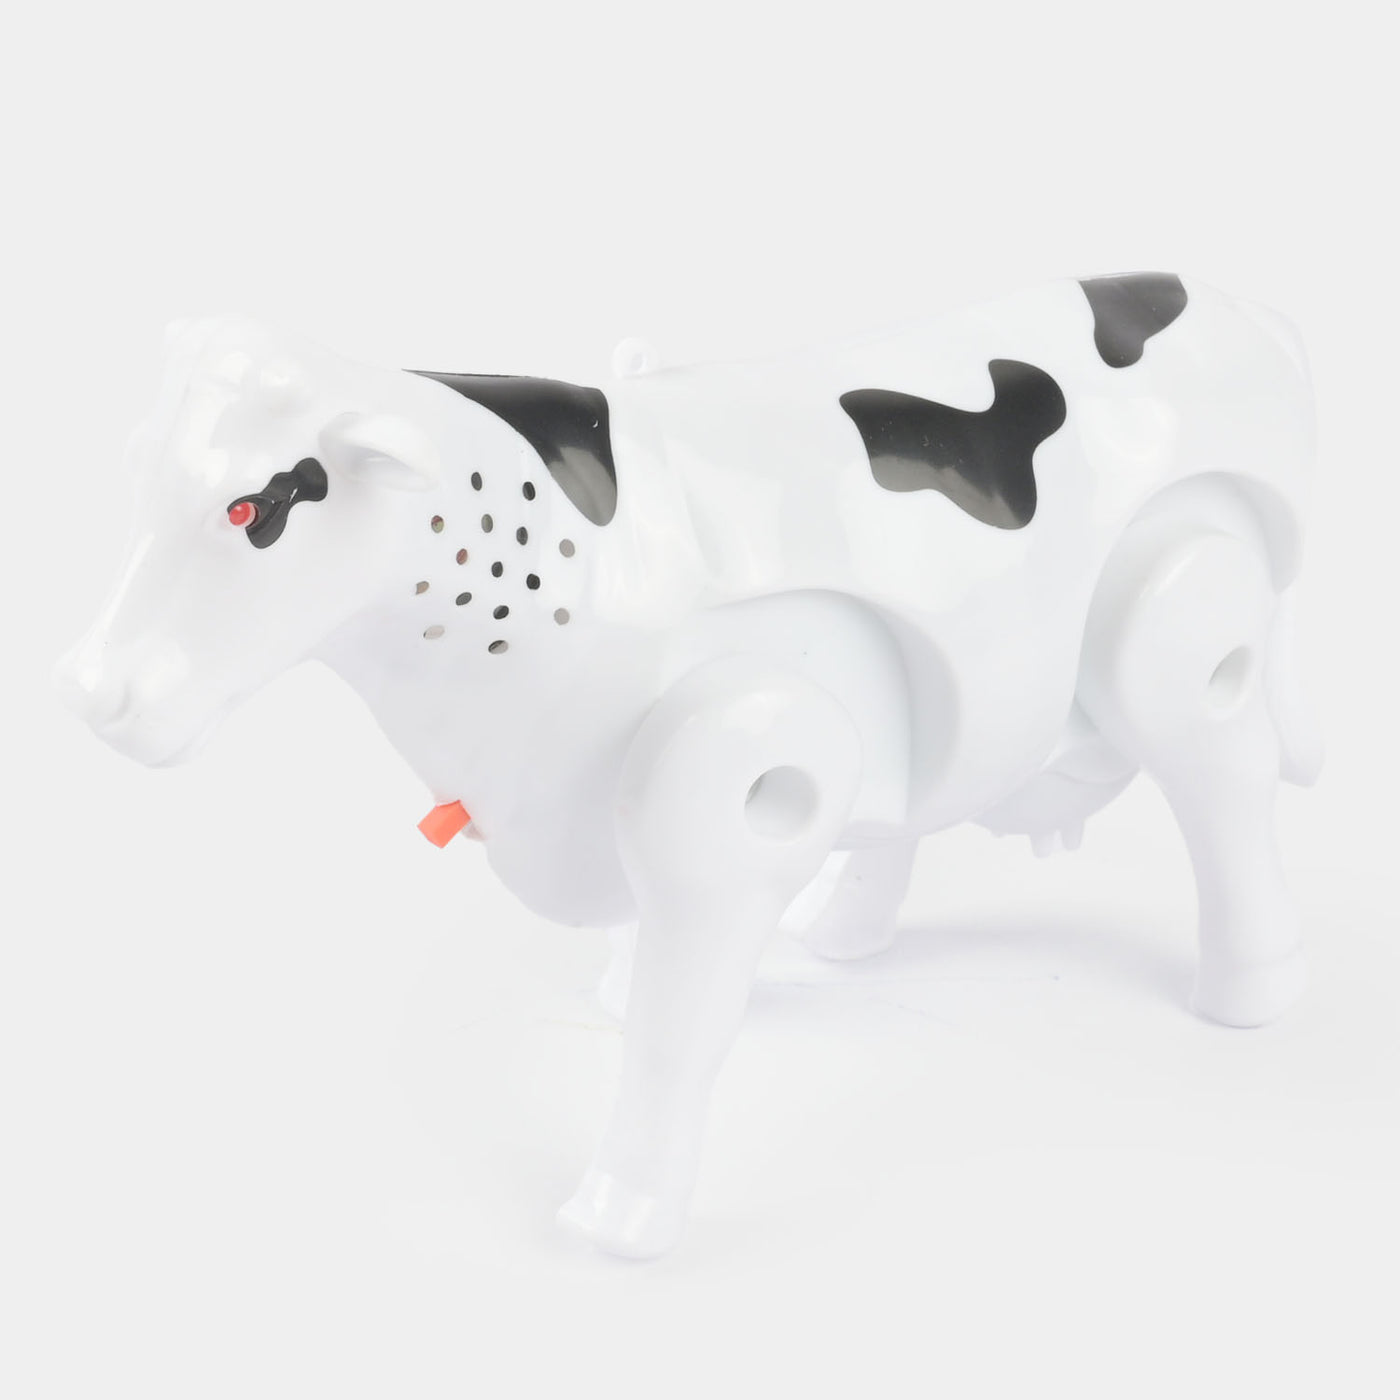 Milk Cow Musical Toy For kids